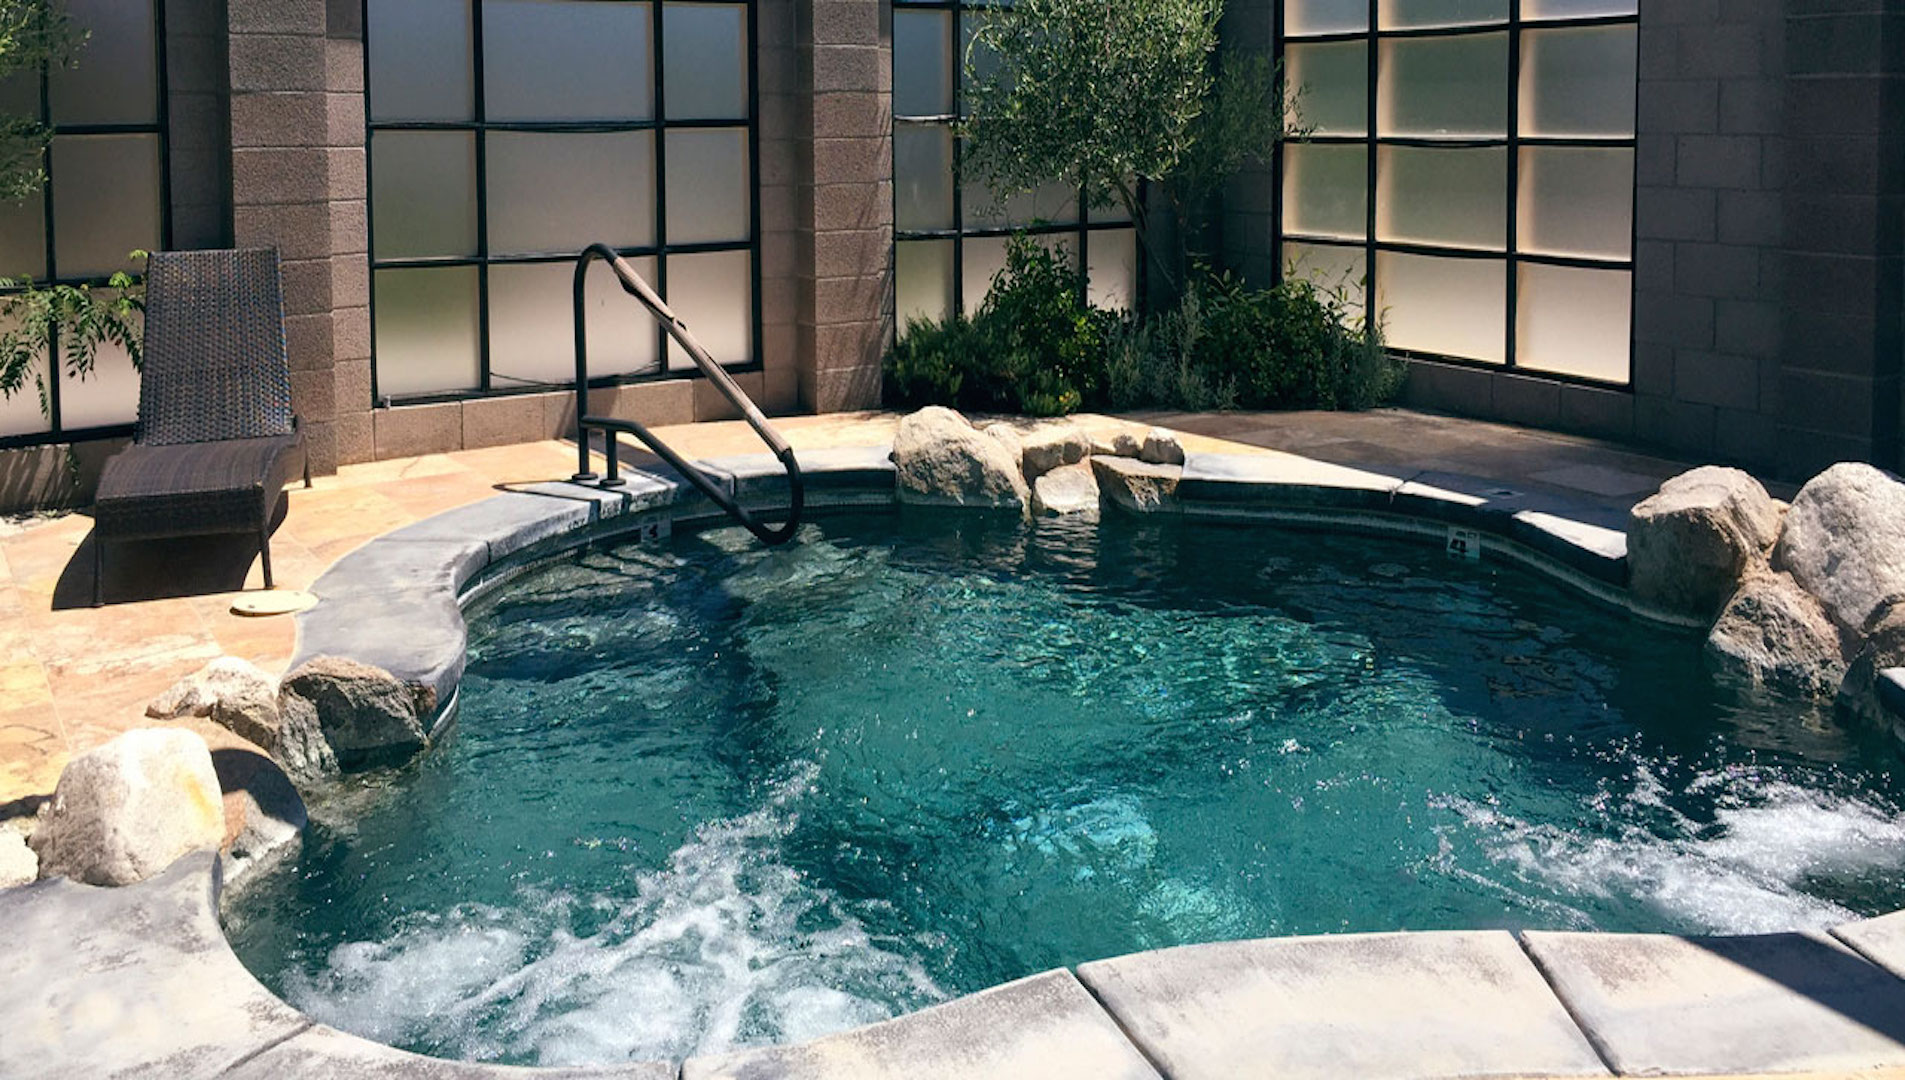 Turquoise blue waters in the healing jacuzzi pools of the Soulistic Healing Center.